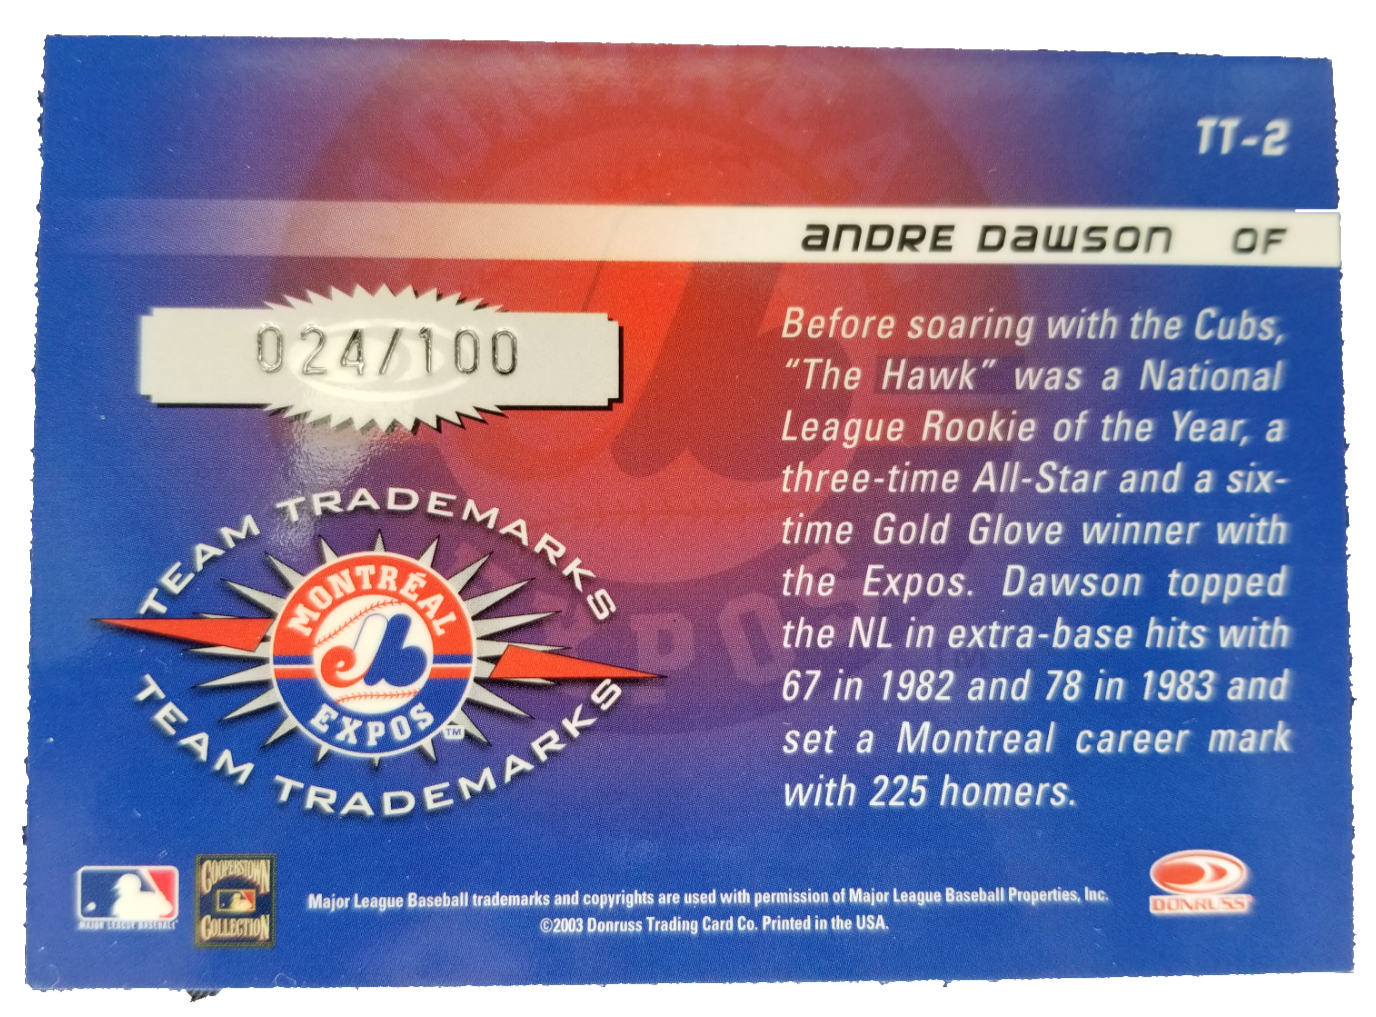 2003 Donruss Signature Series Andre Dawson Autographed Card Montreal Expos  /100 – All In Autographs